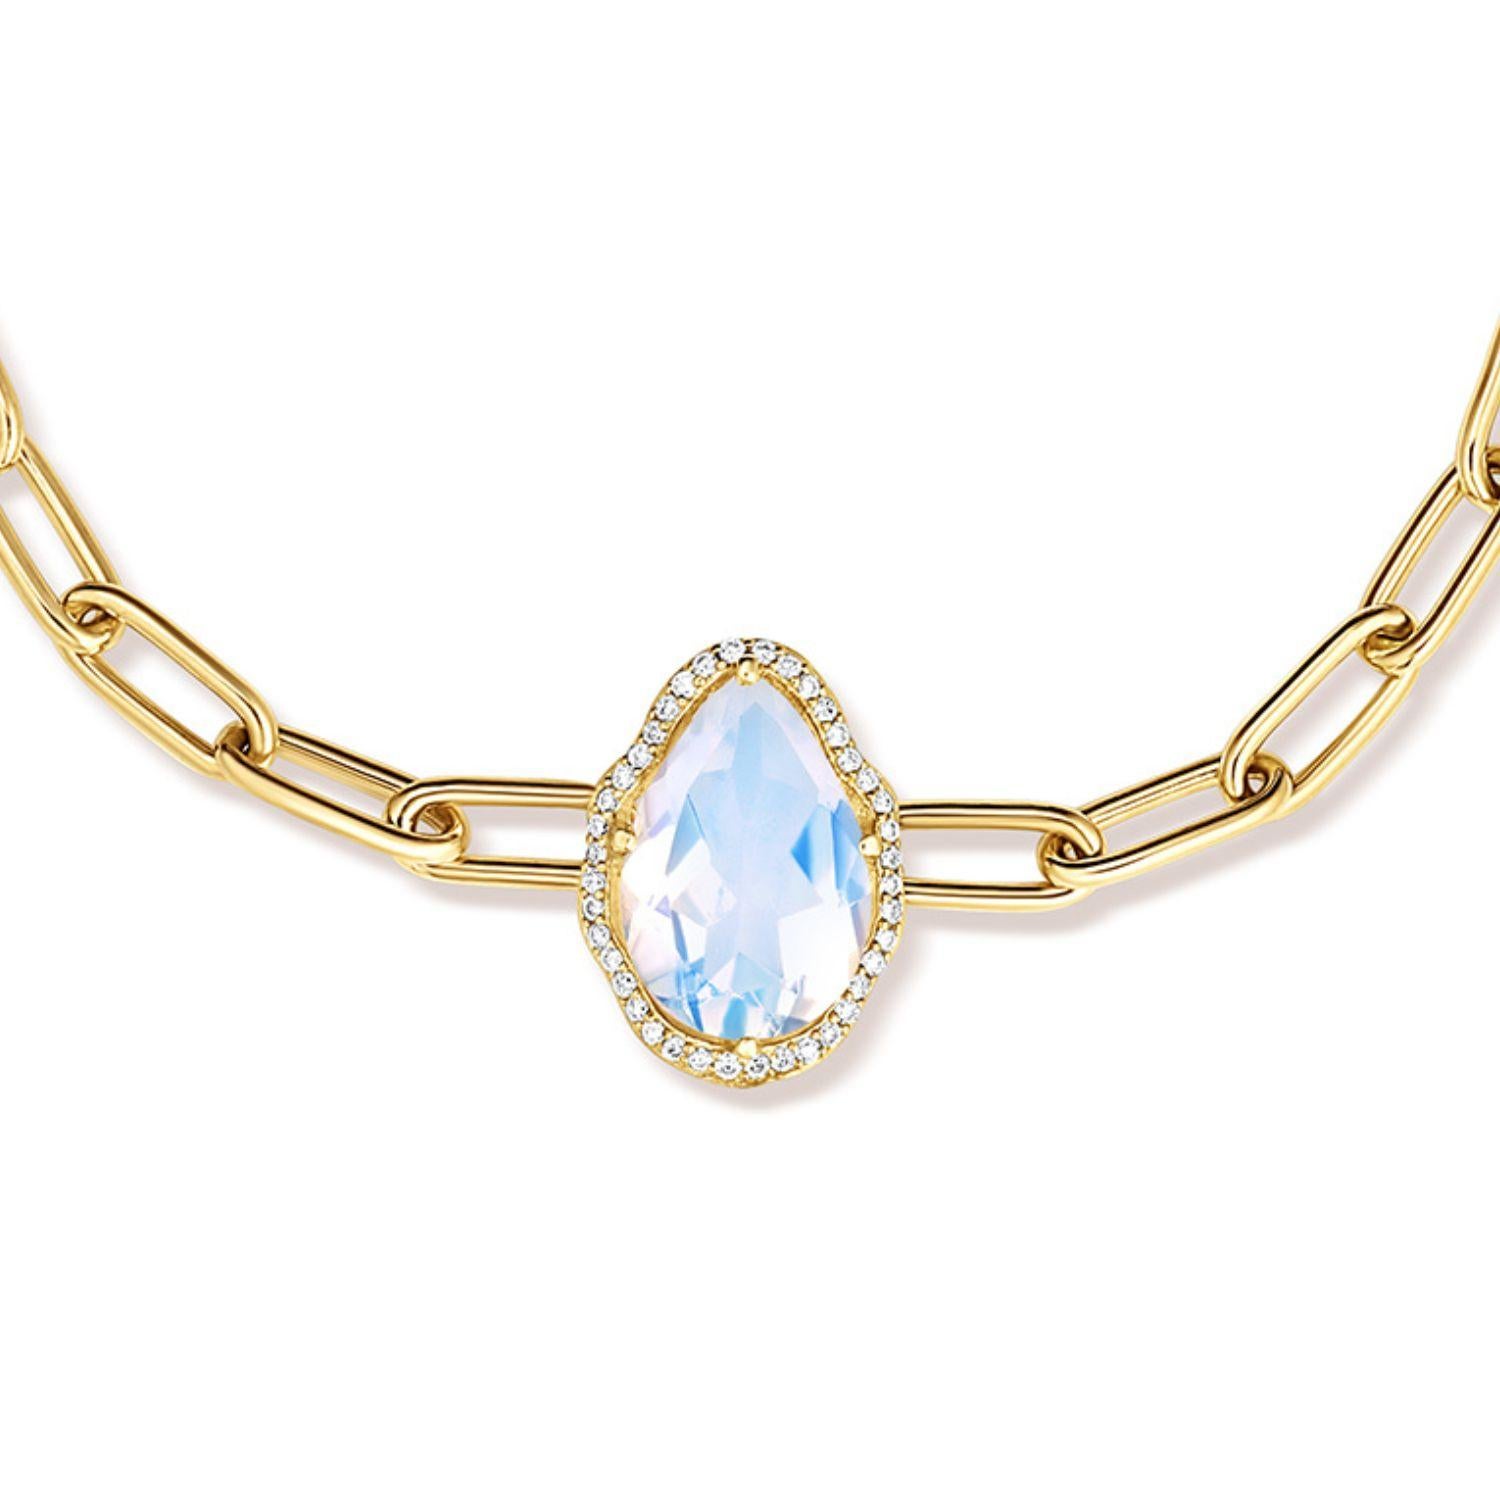 Glow Bracelet. 18K yellow gold (750/1000), with a 2.56 carat pear-cut blue moonstone and 0.1 carats of round brilliant-cut diamonds. 18K yellow gold chain with adjustable length of 17 cm.